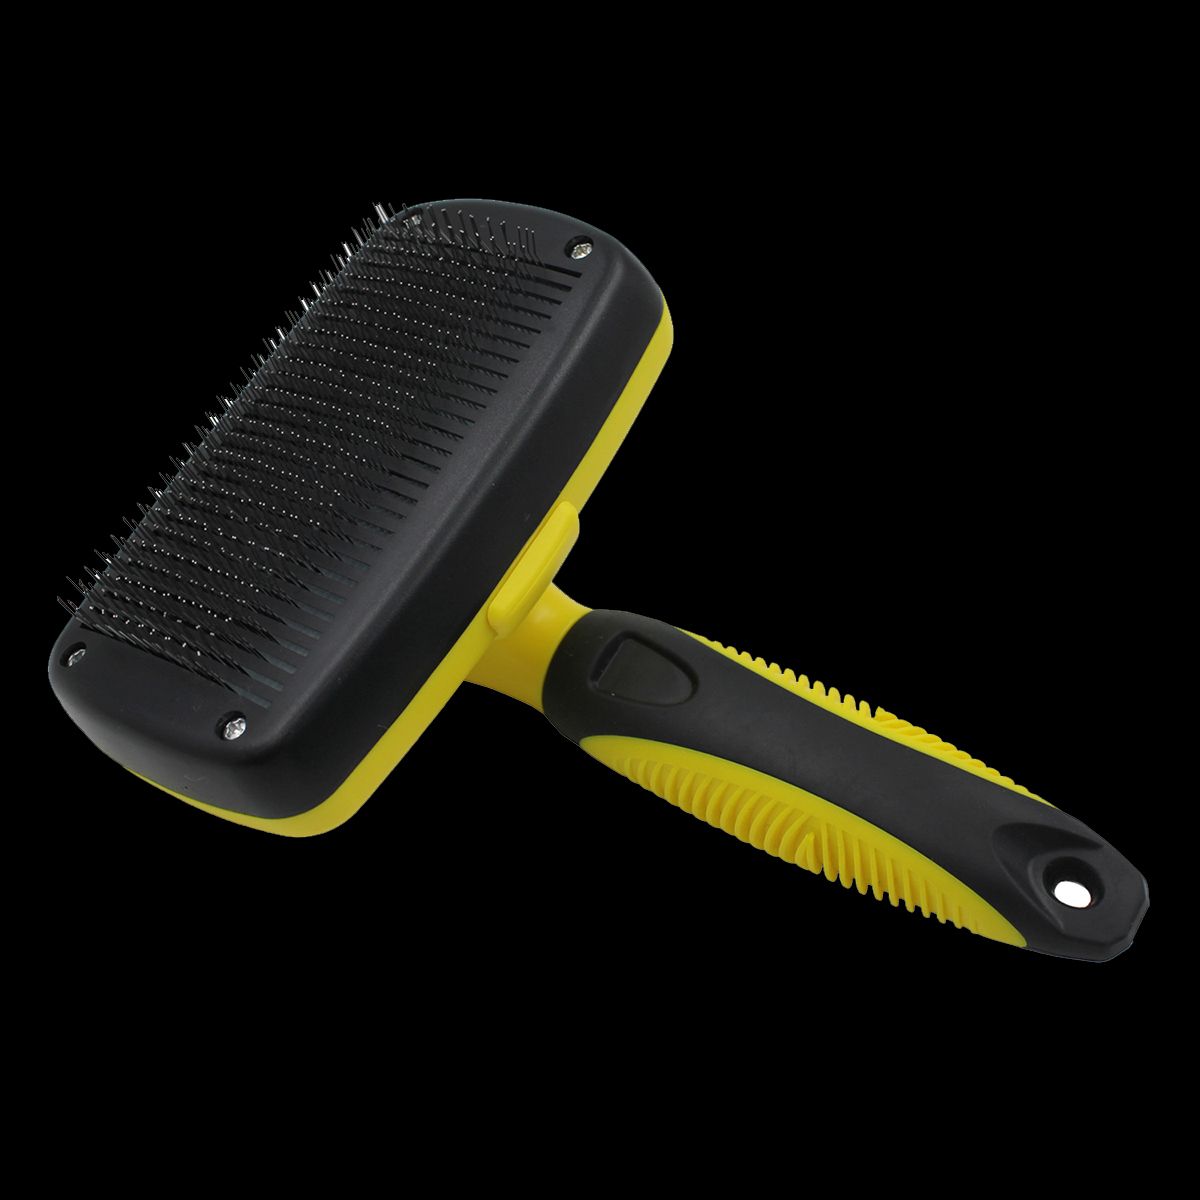 Dog-Hair-Brush-Pet-Comb-handheld-Handle-Double-Sided-Open-Knot-Comb-Slicker-Hair-1574786